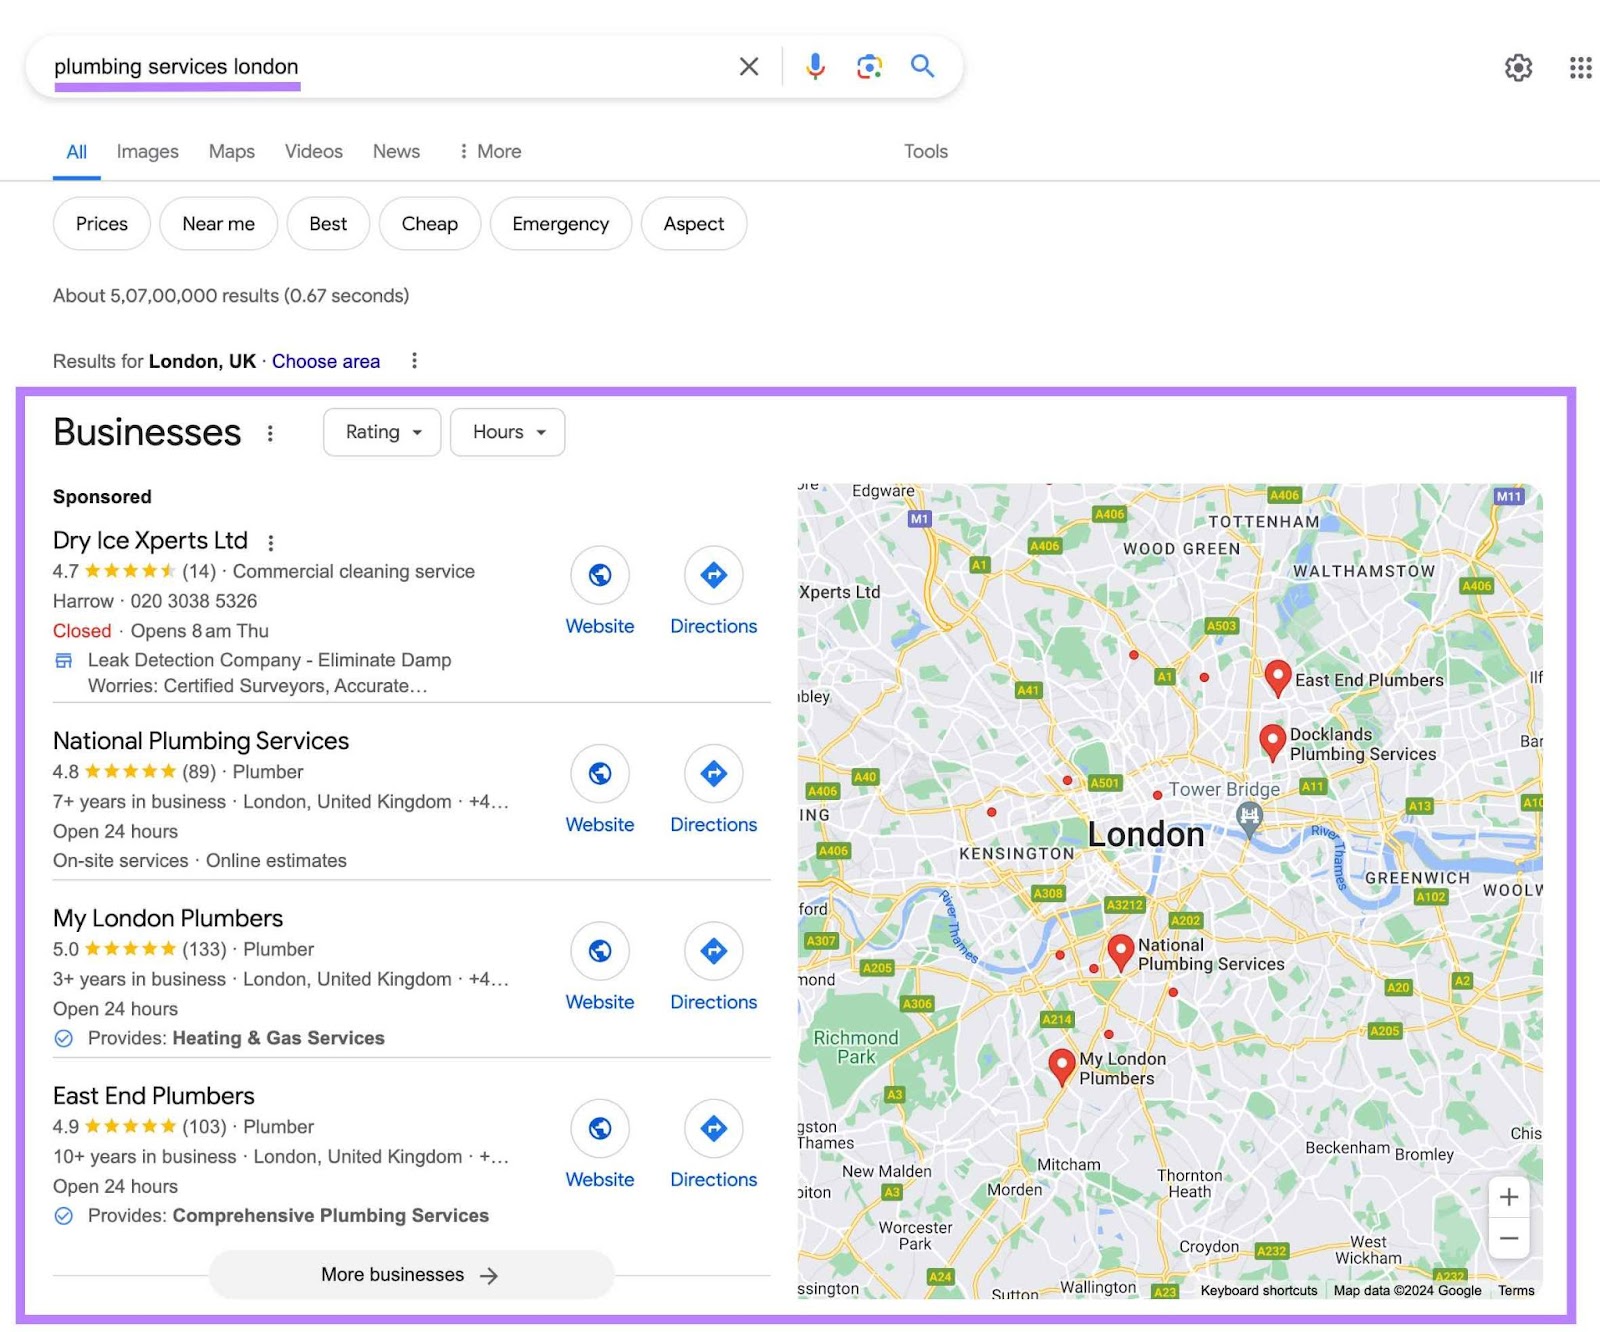 Google search results for "plumbing services london" showing the local pack with businesses.